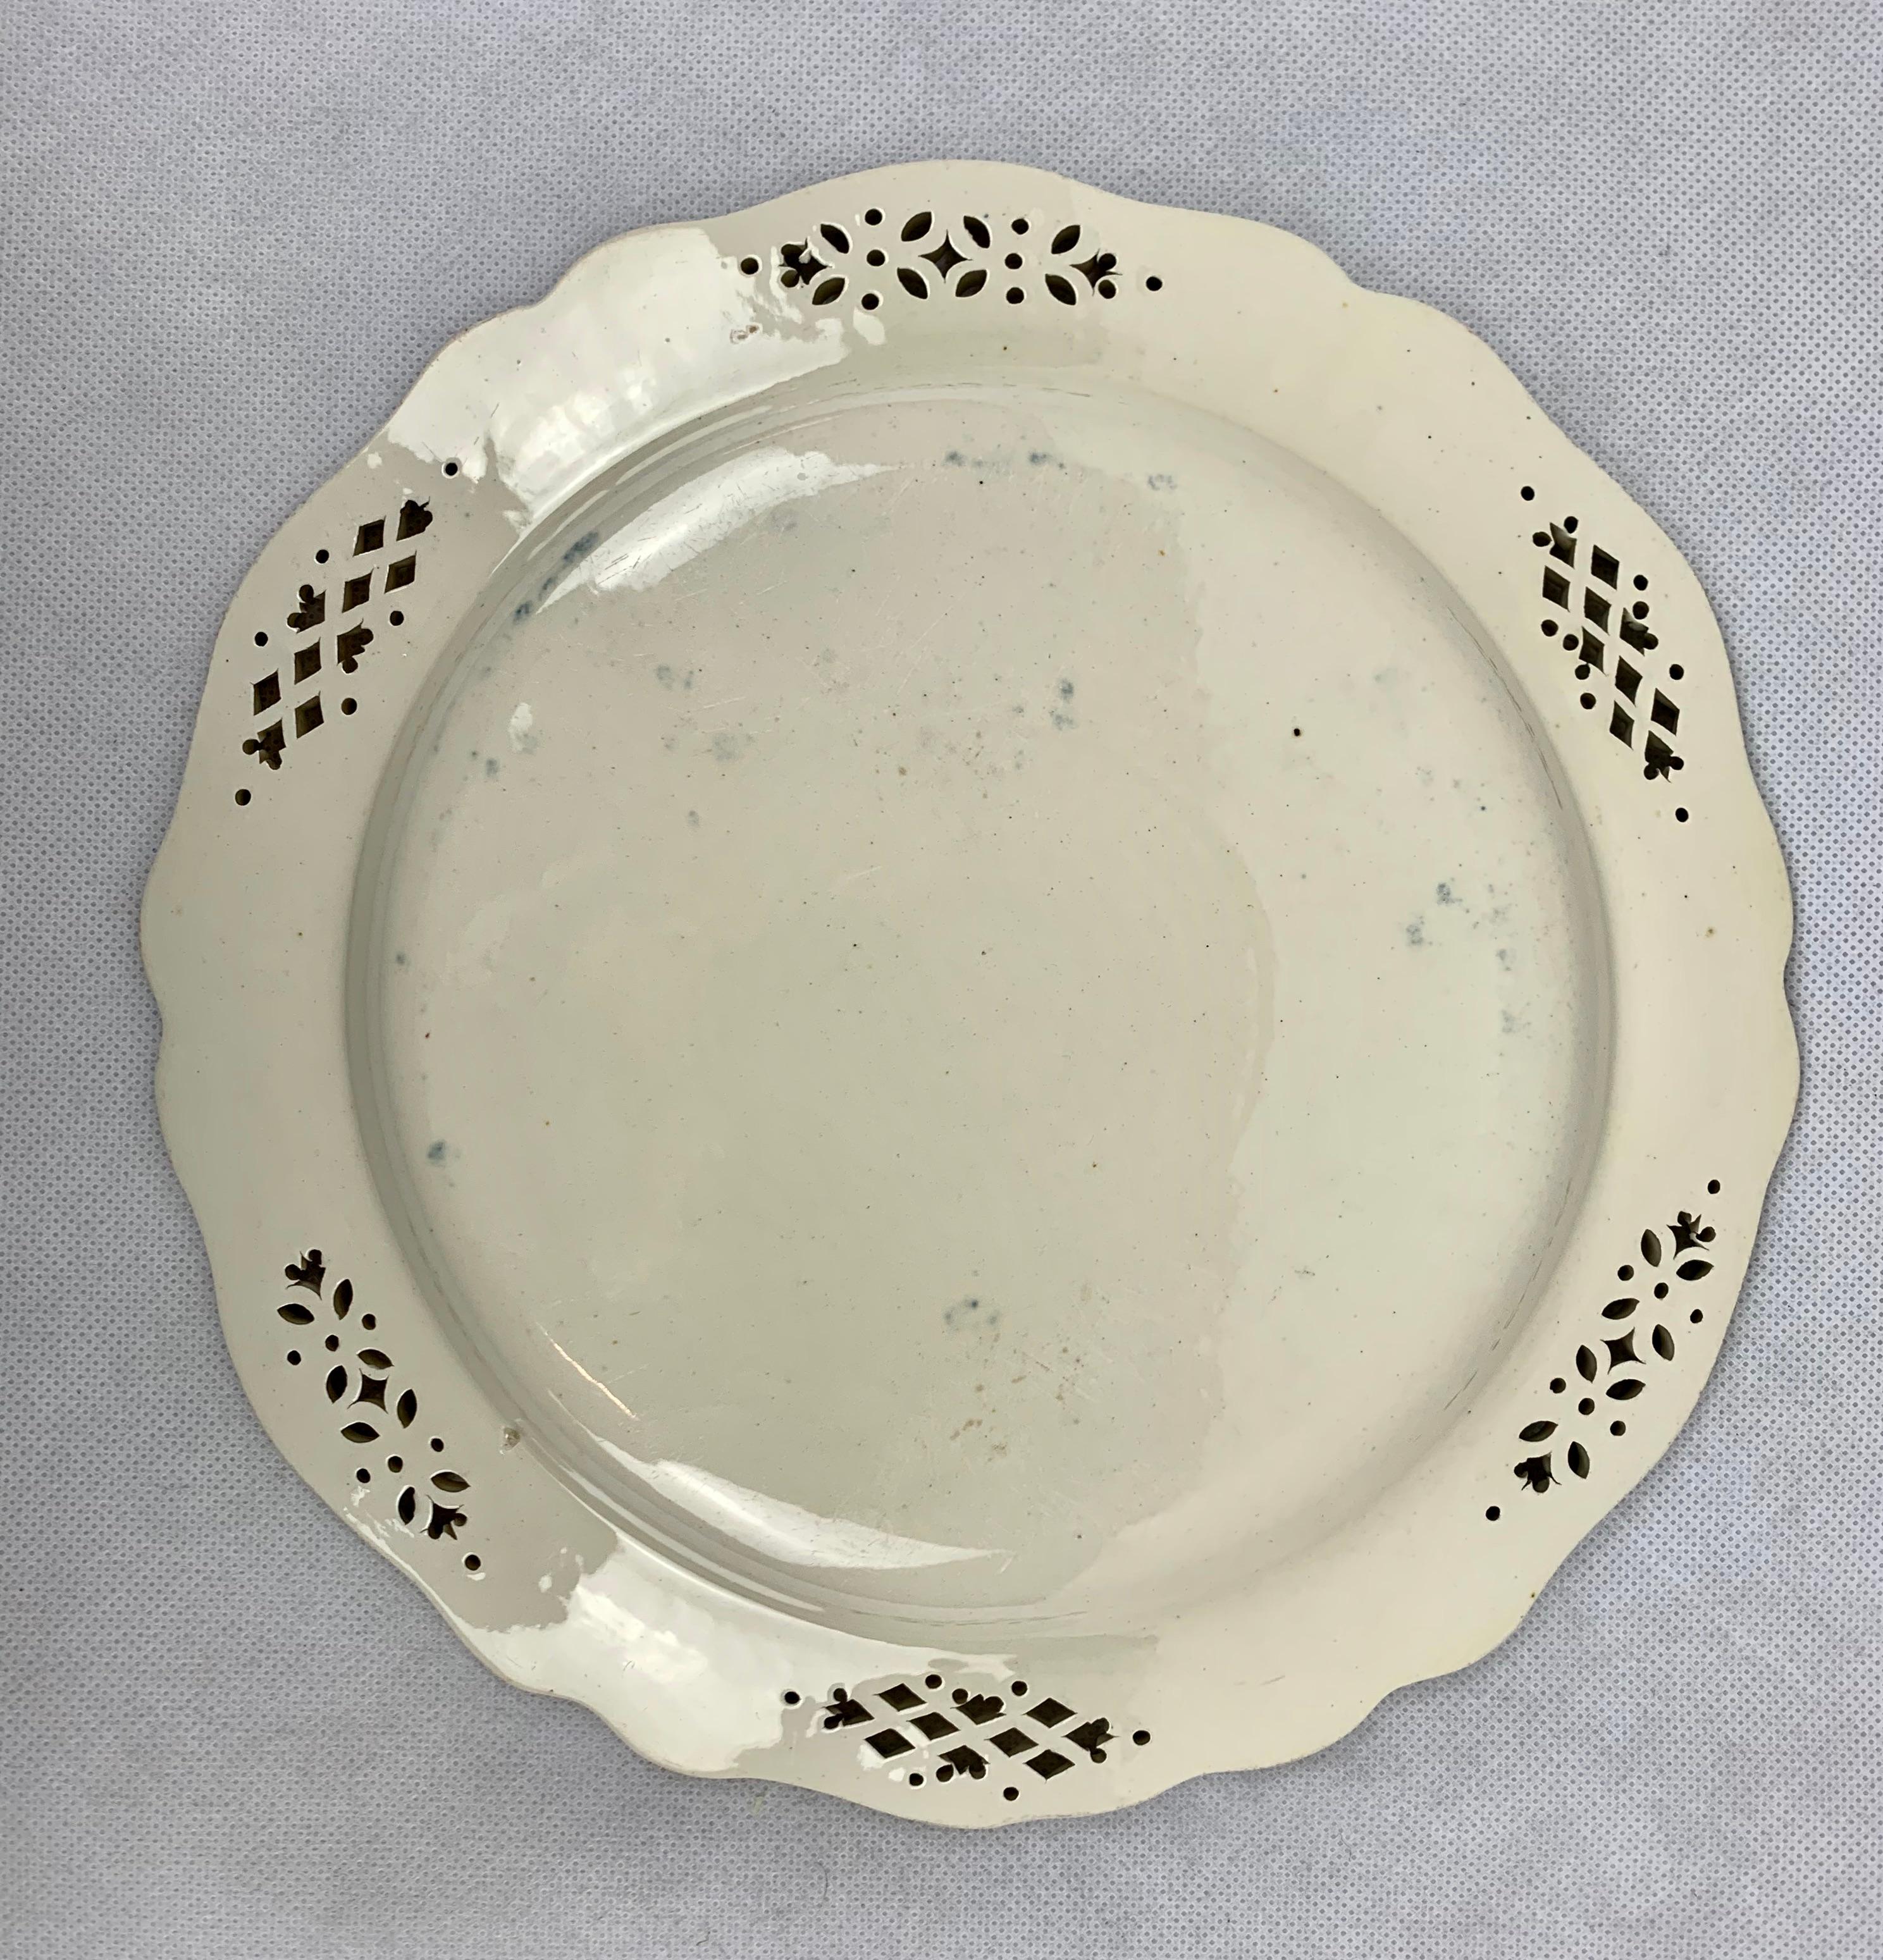 Hand-Crafted Antique Reticulated Creamware Plate-England, Late 18th Century